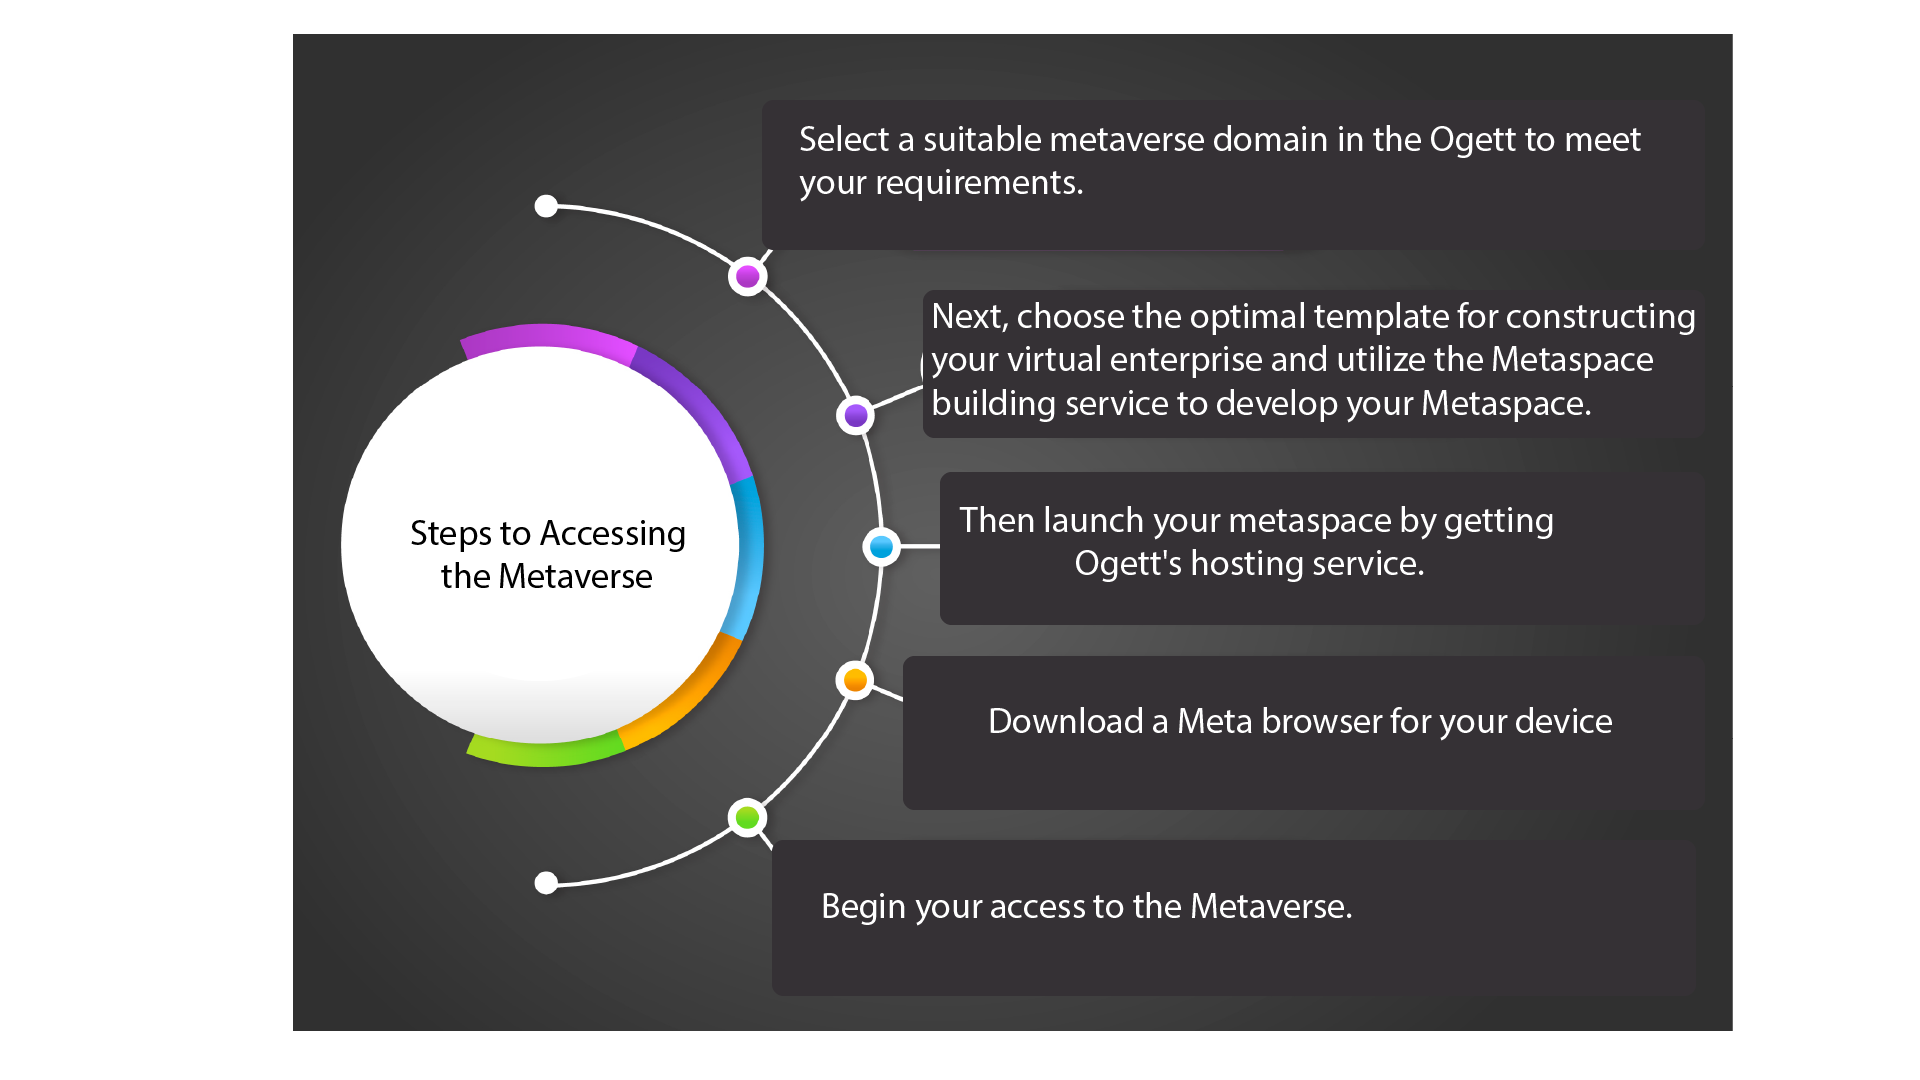 How to Use Ogett to Access the Metaverse